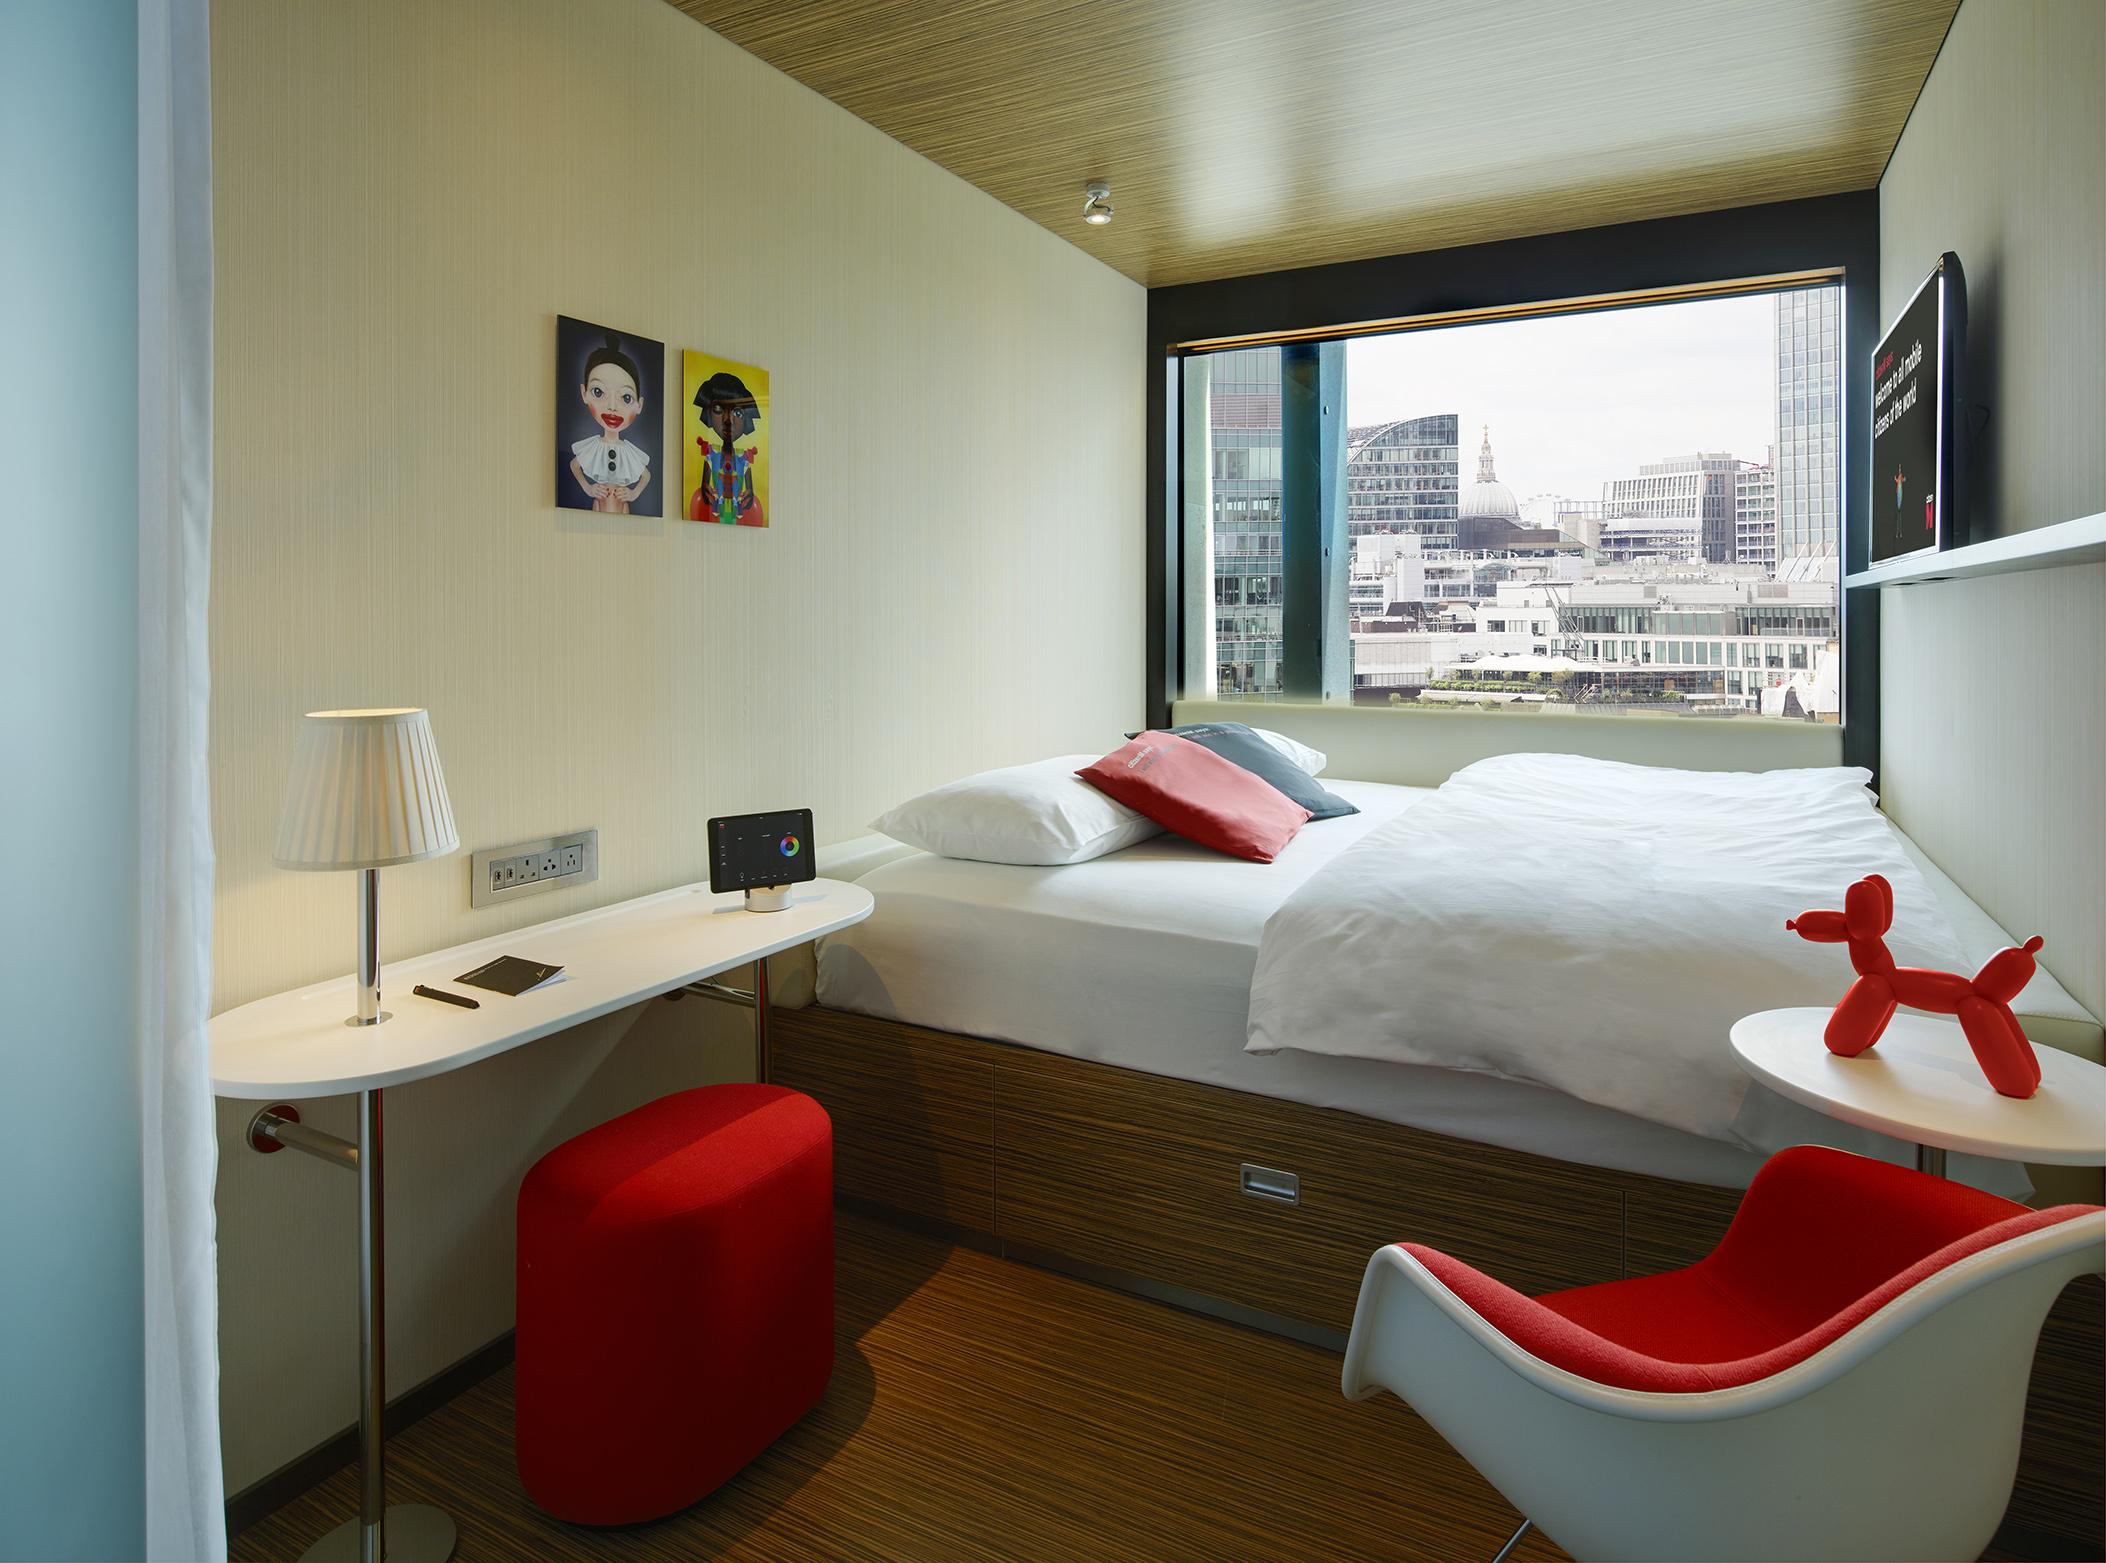 Snug: citizenM’s rooms make the most of limited space but bathroom privacy is problem